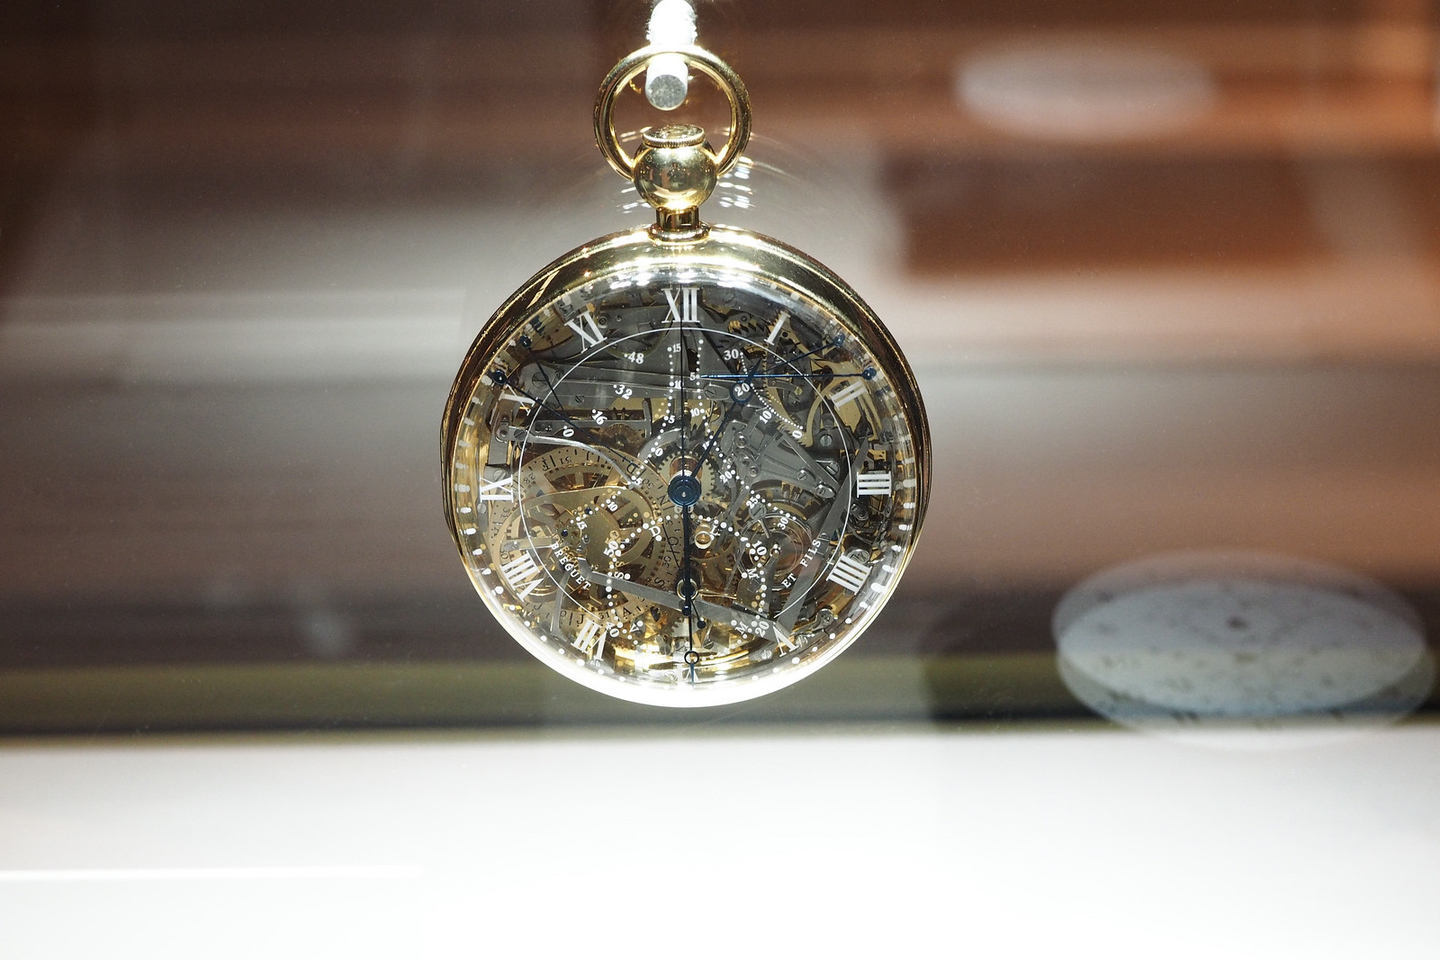 The Special Grand Complication pocket watch No. 1160